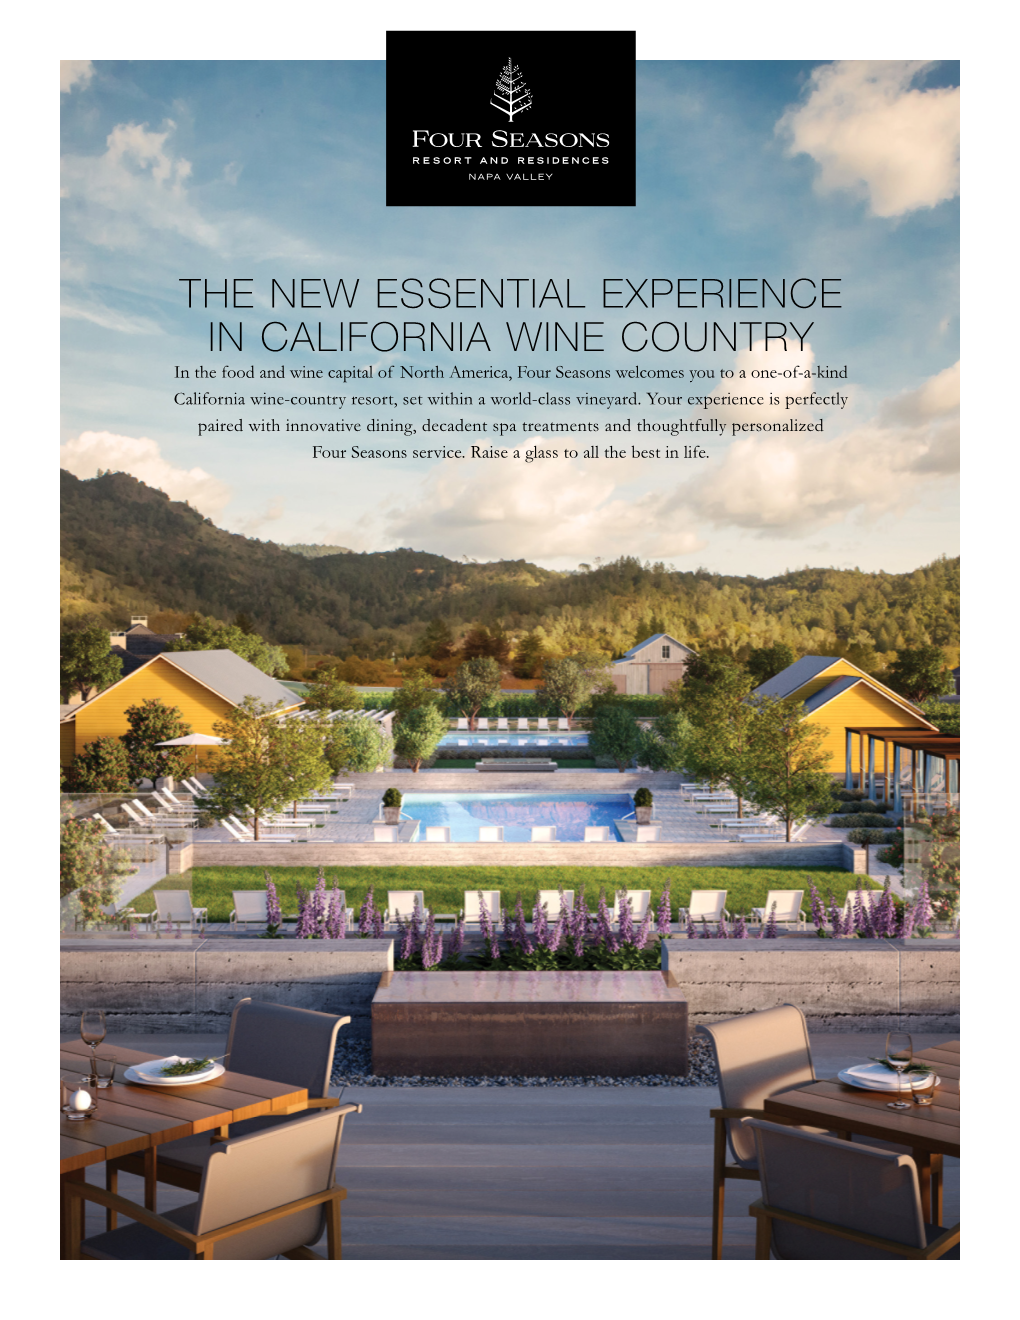 The New Essential Experience in California Wine Country